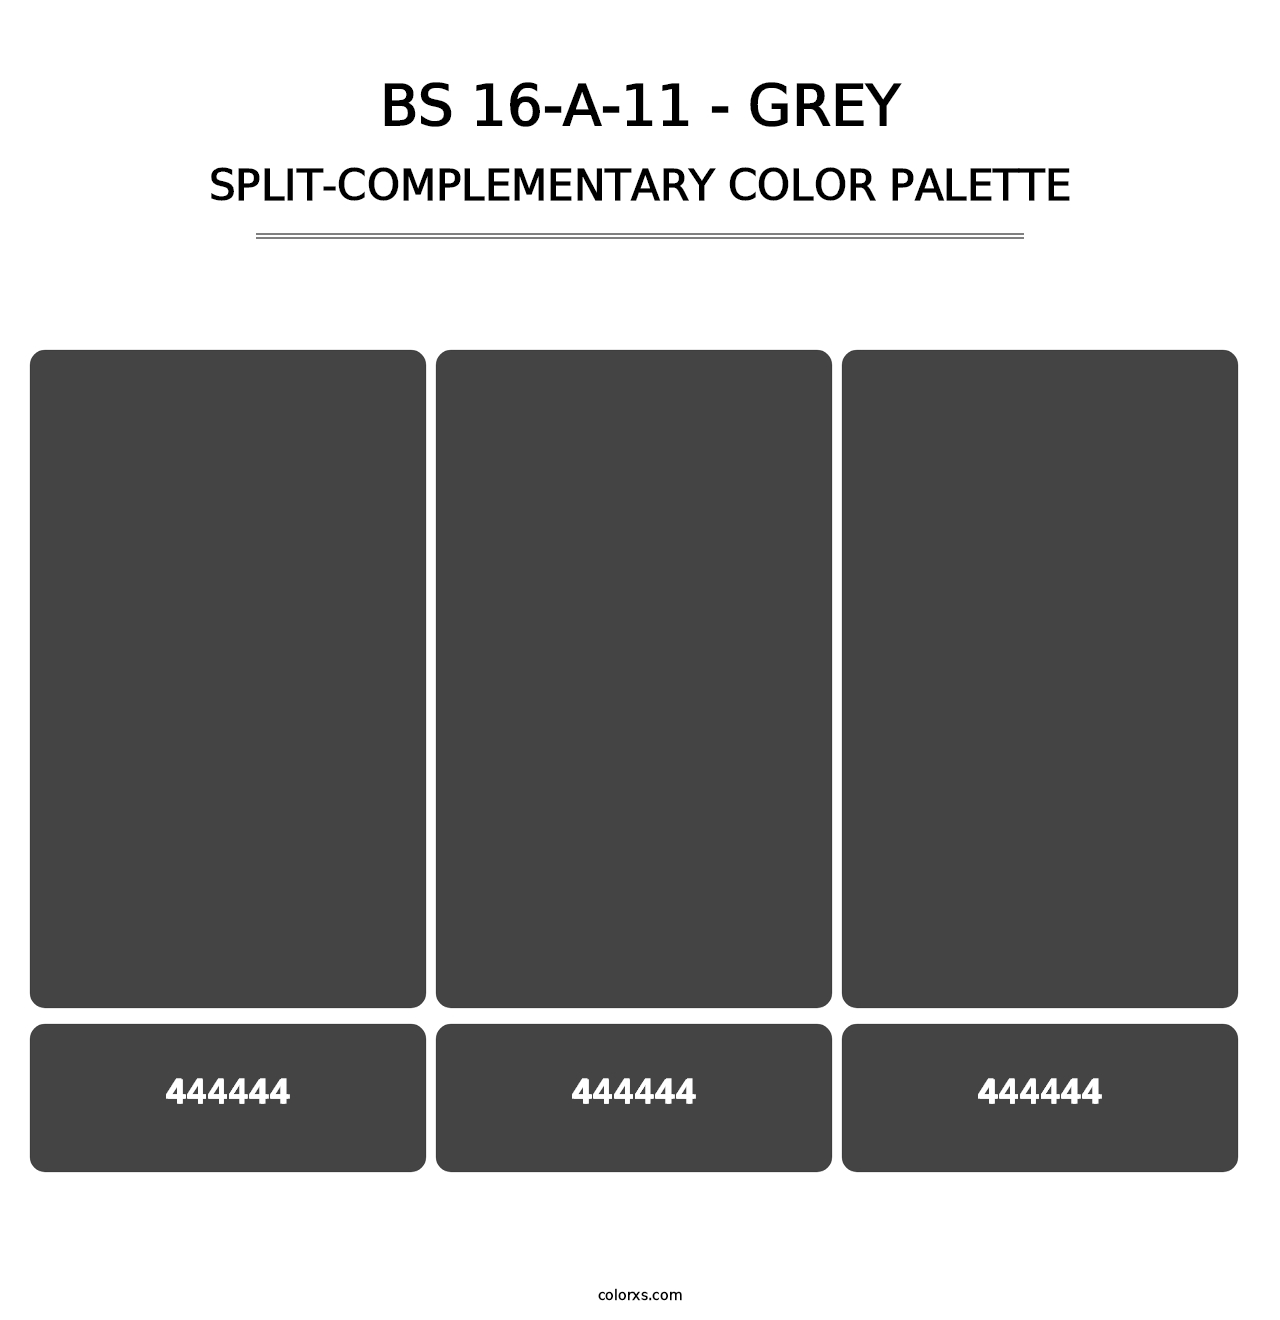 BS 16-A-11 - Grey - Split-Complementary Color Palette